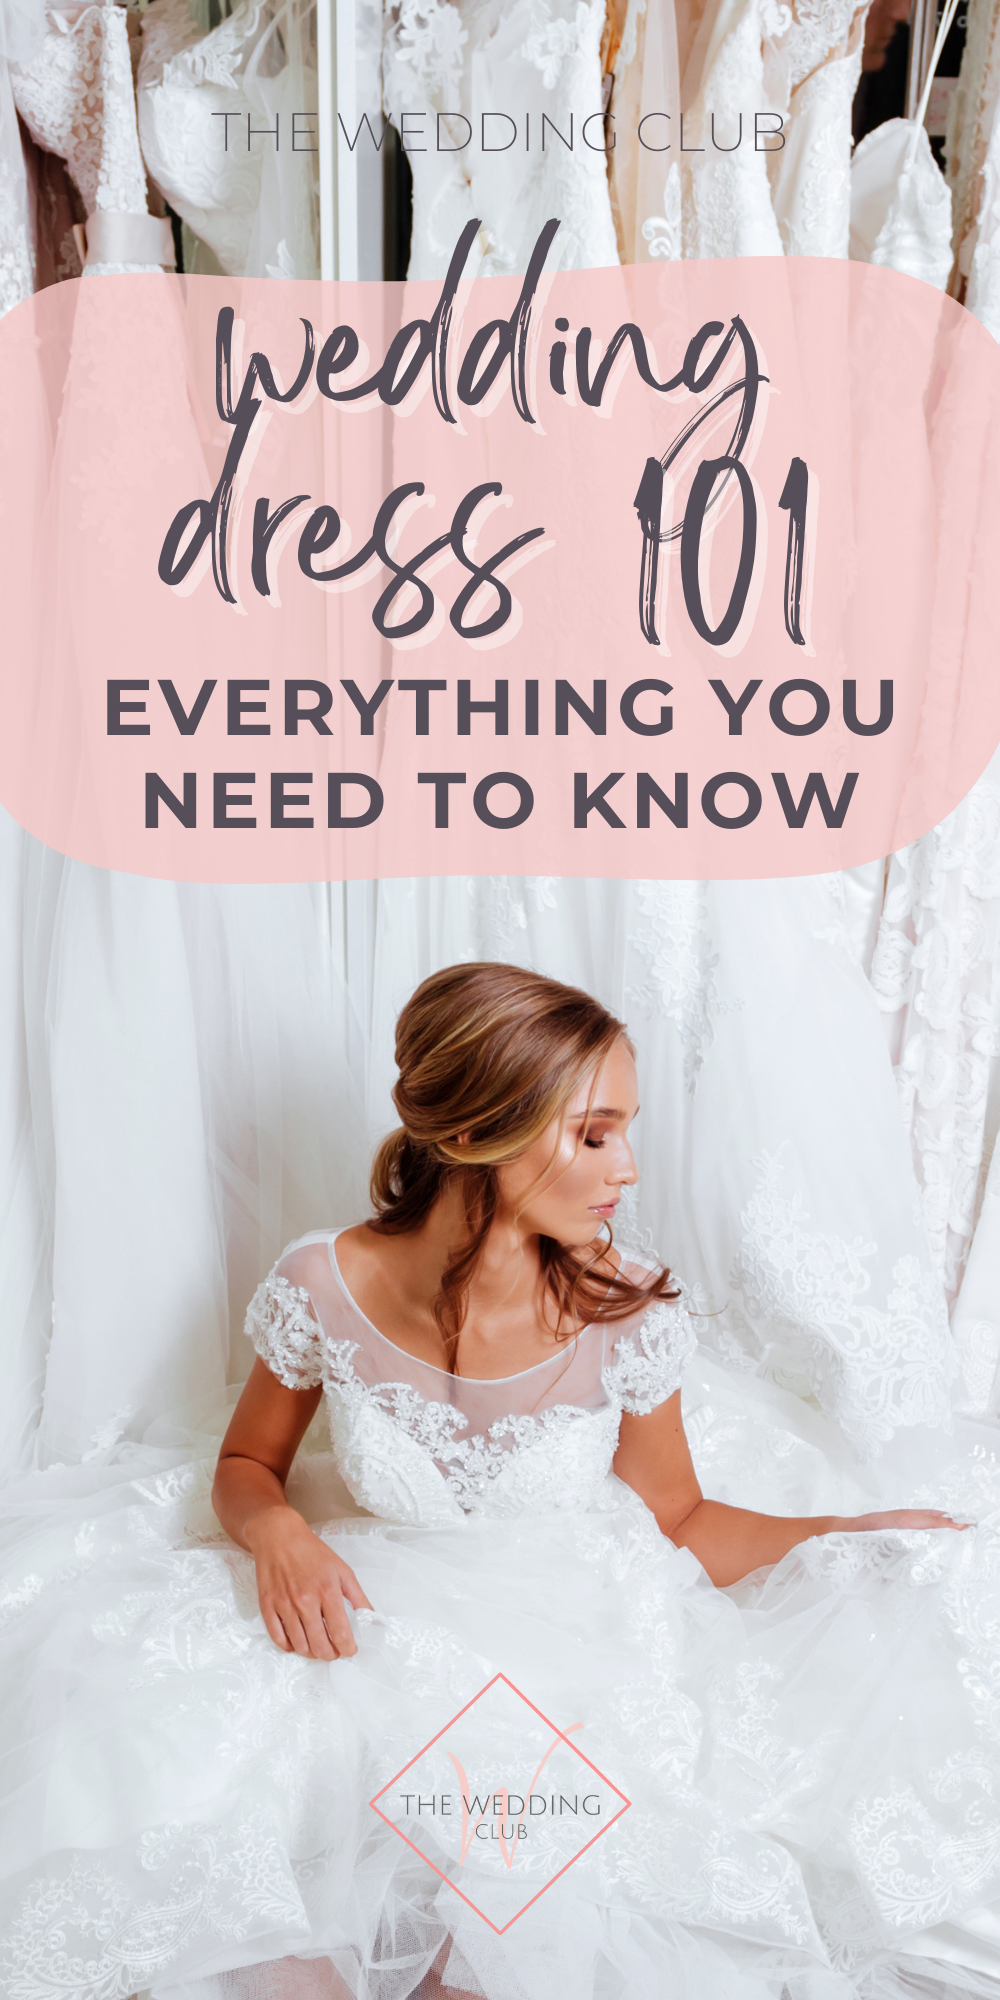 All Your Wedding Dress Questions Answered! – The Wedding Club